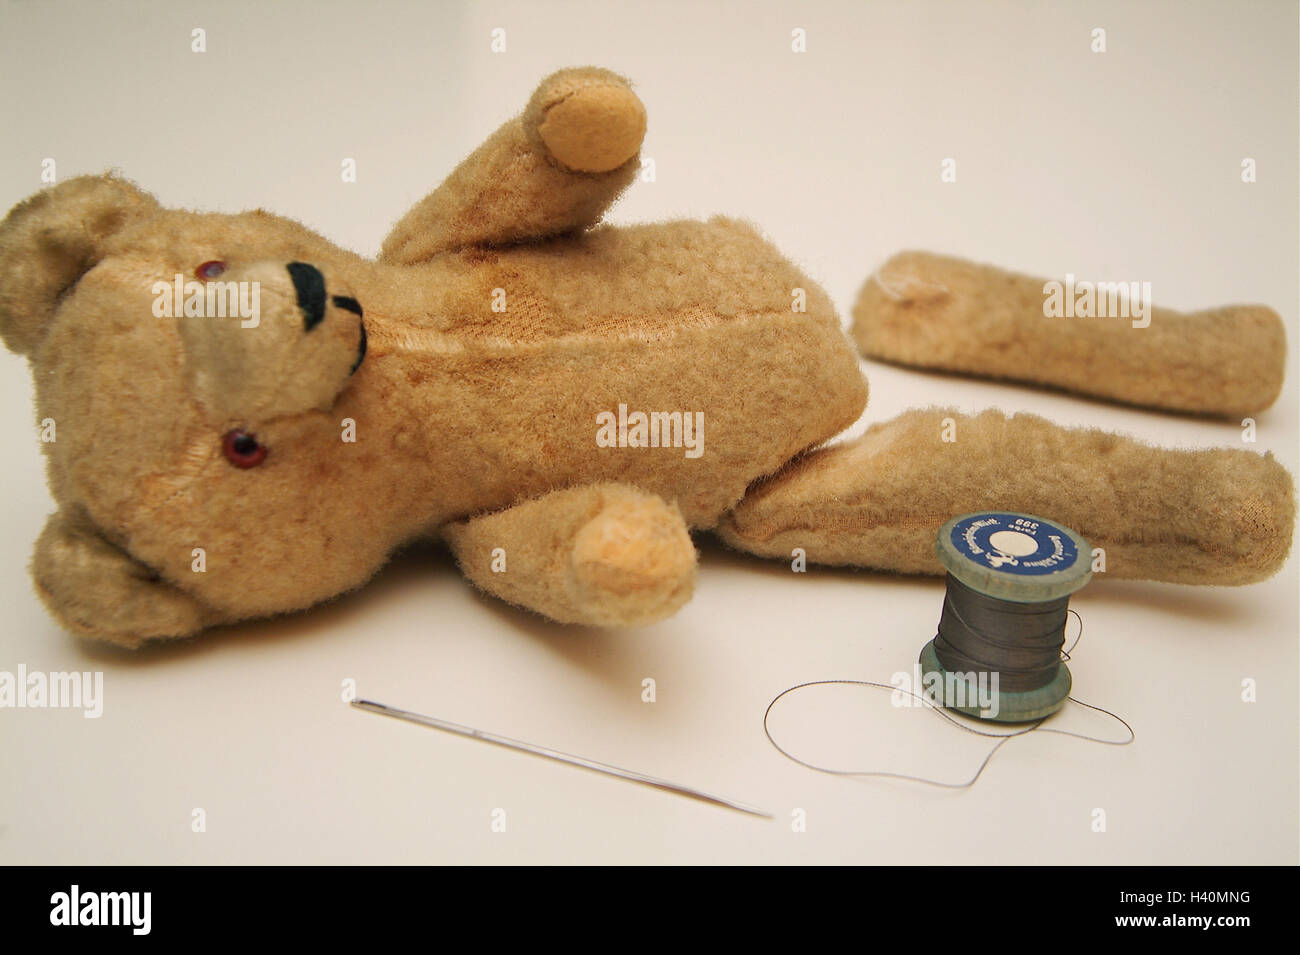 Soft toy, teddy bear, broken, bone, ragged, needle, thread, toys, soft animal, nonsense animal, soft toy, Teddy, Stoffteddy bear, nostalgically, old, uses, worn-out, discarded, forget, lie, foot loose, torn out, damage, defective, defectively, broken, rui Stock Photo